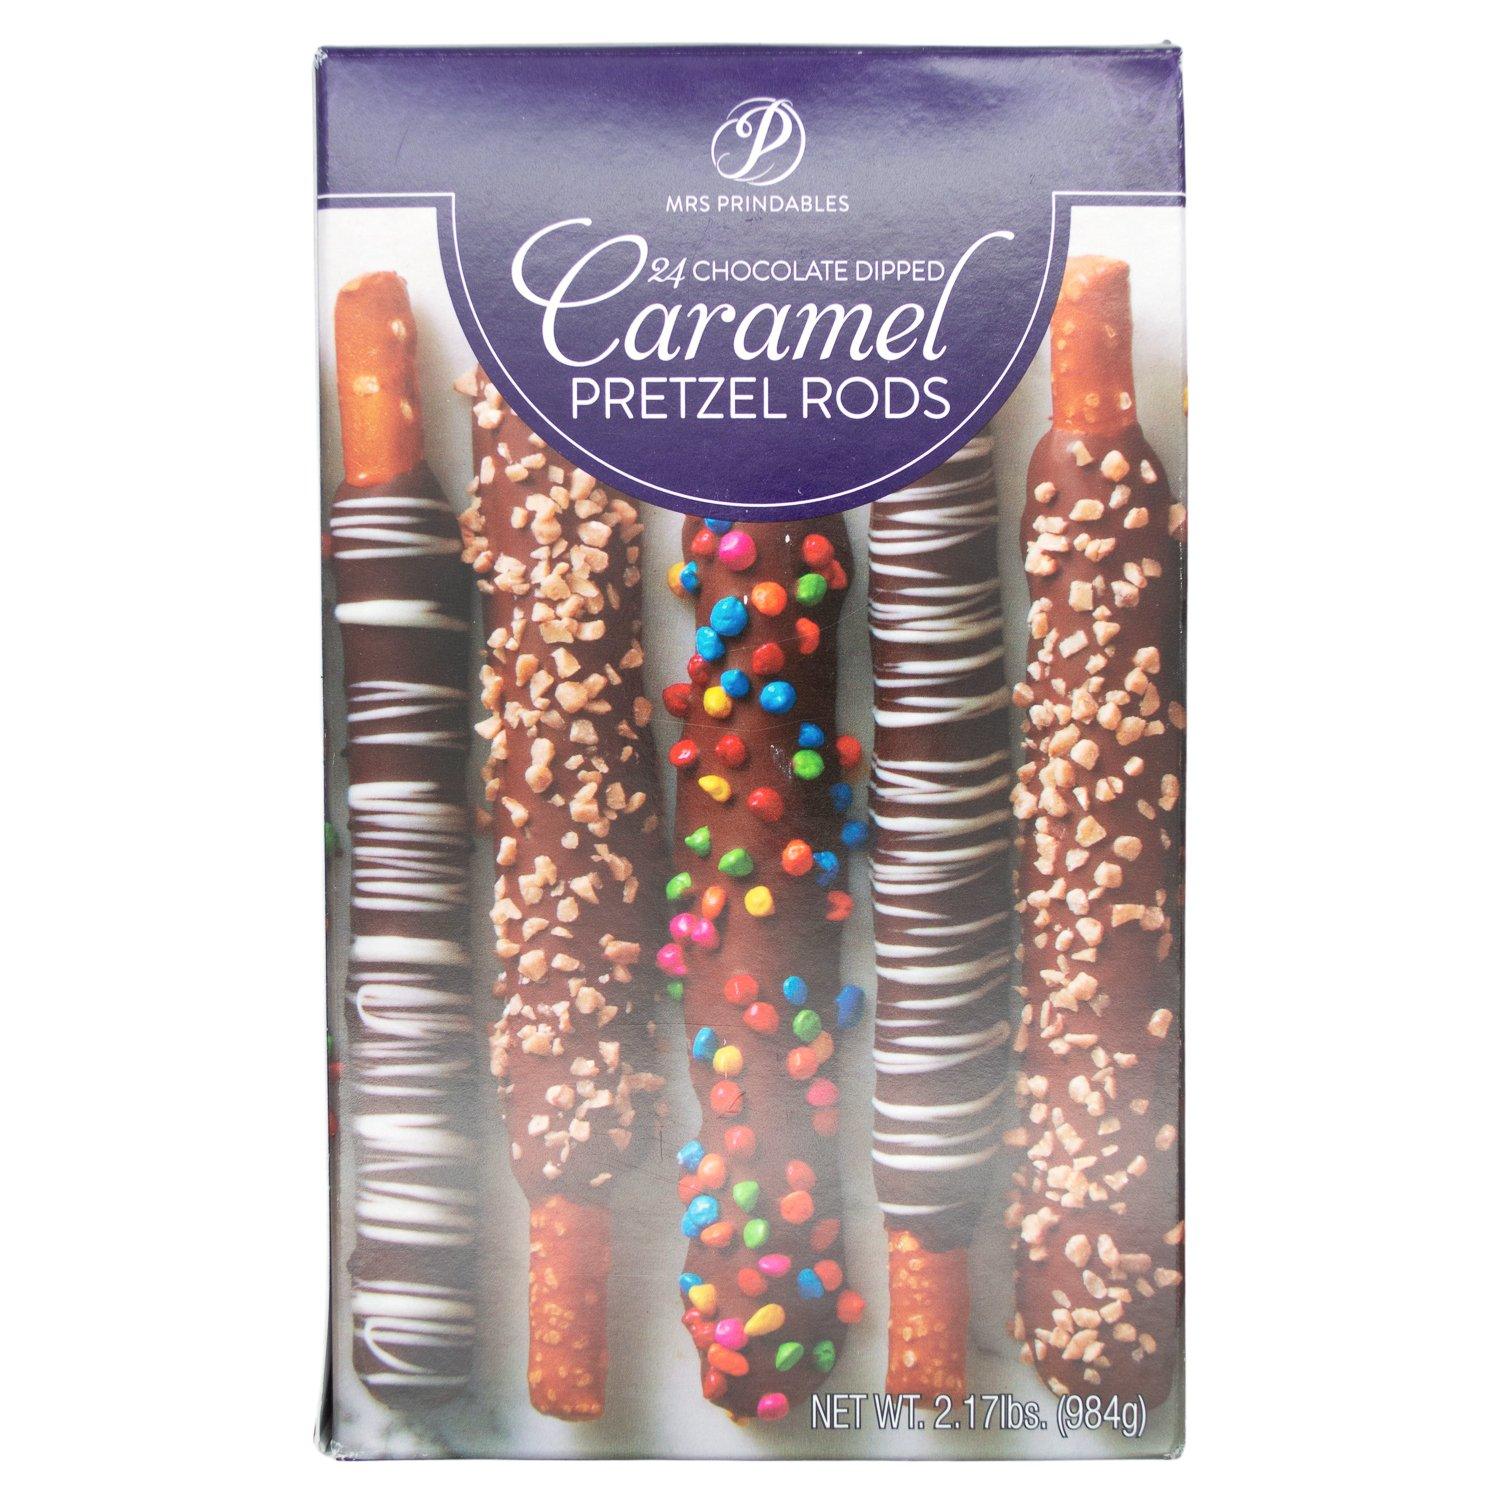 Mrs Prindables Chocolate and Caramel Dipped Pretzels Rods Meltable Mrs Prindables Variety 24 Rods-2.17 Pound 